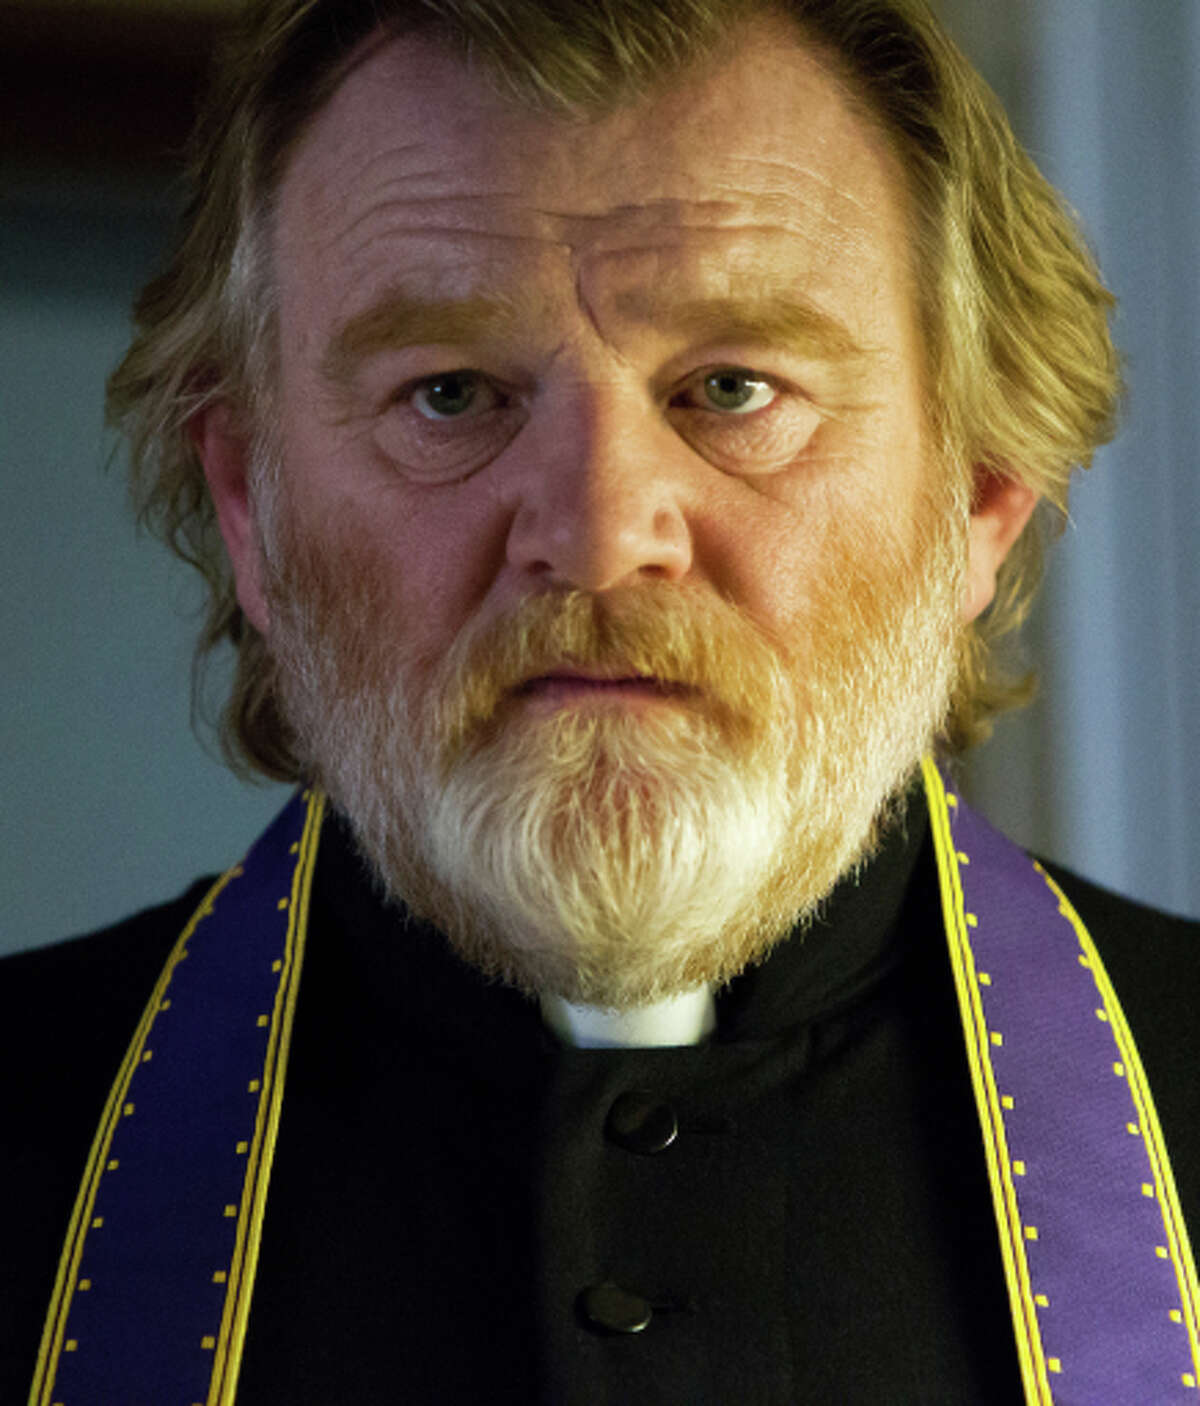 Brendan Gleeson as a priest in trouble in “Calvary”: A smart move about demons.